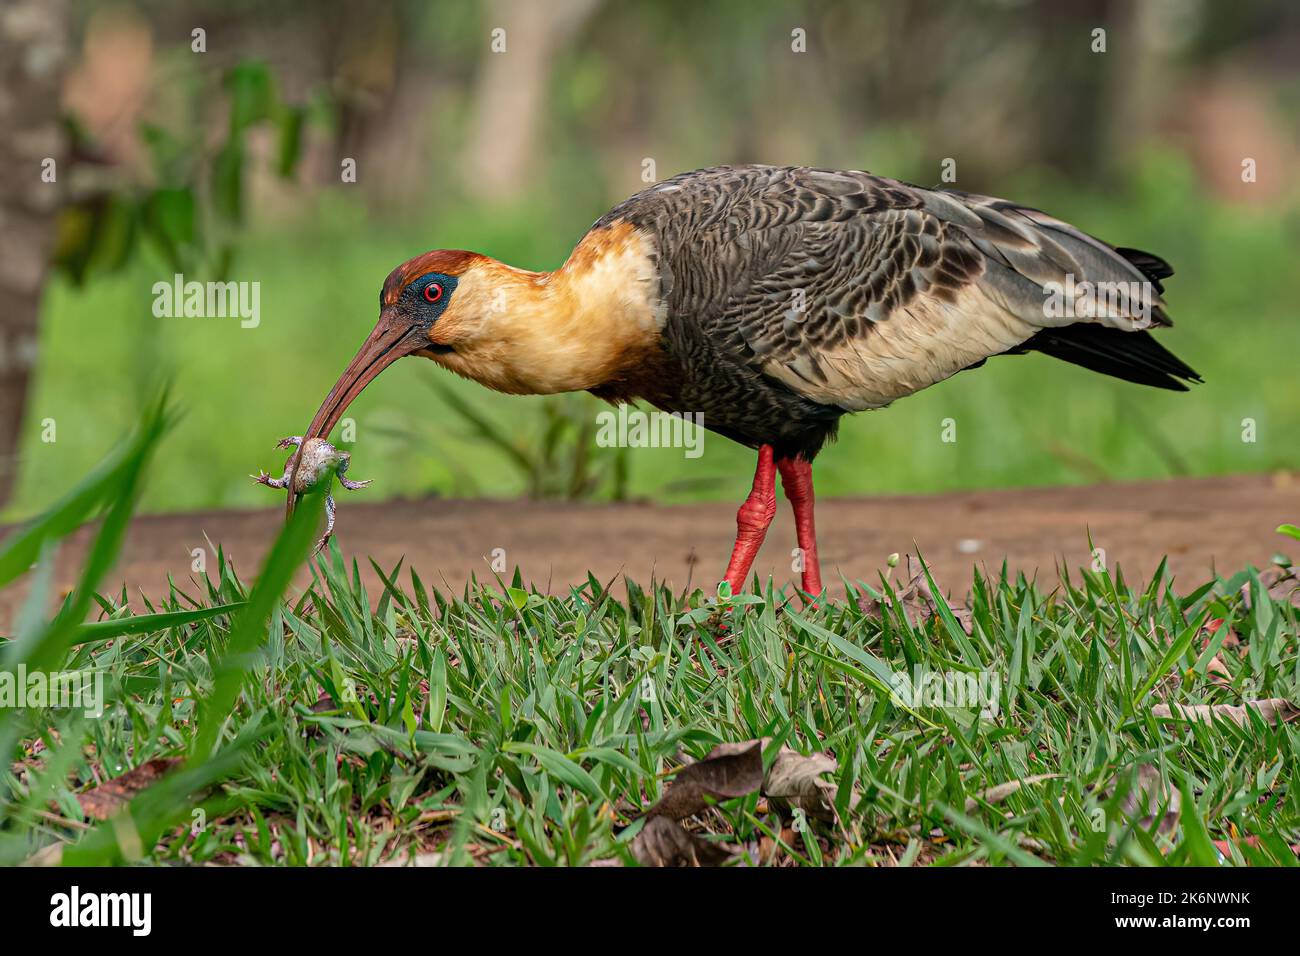 Buff necked Ibis of the species Theristicus caudatus preying on a frog Stock Photo